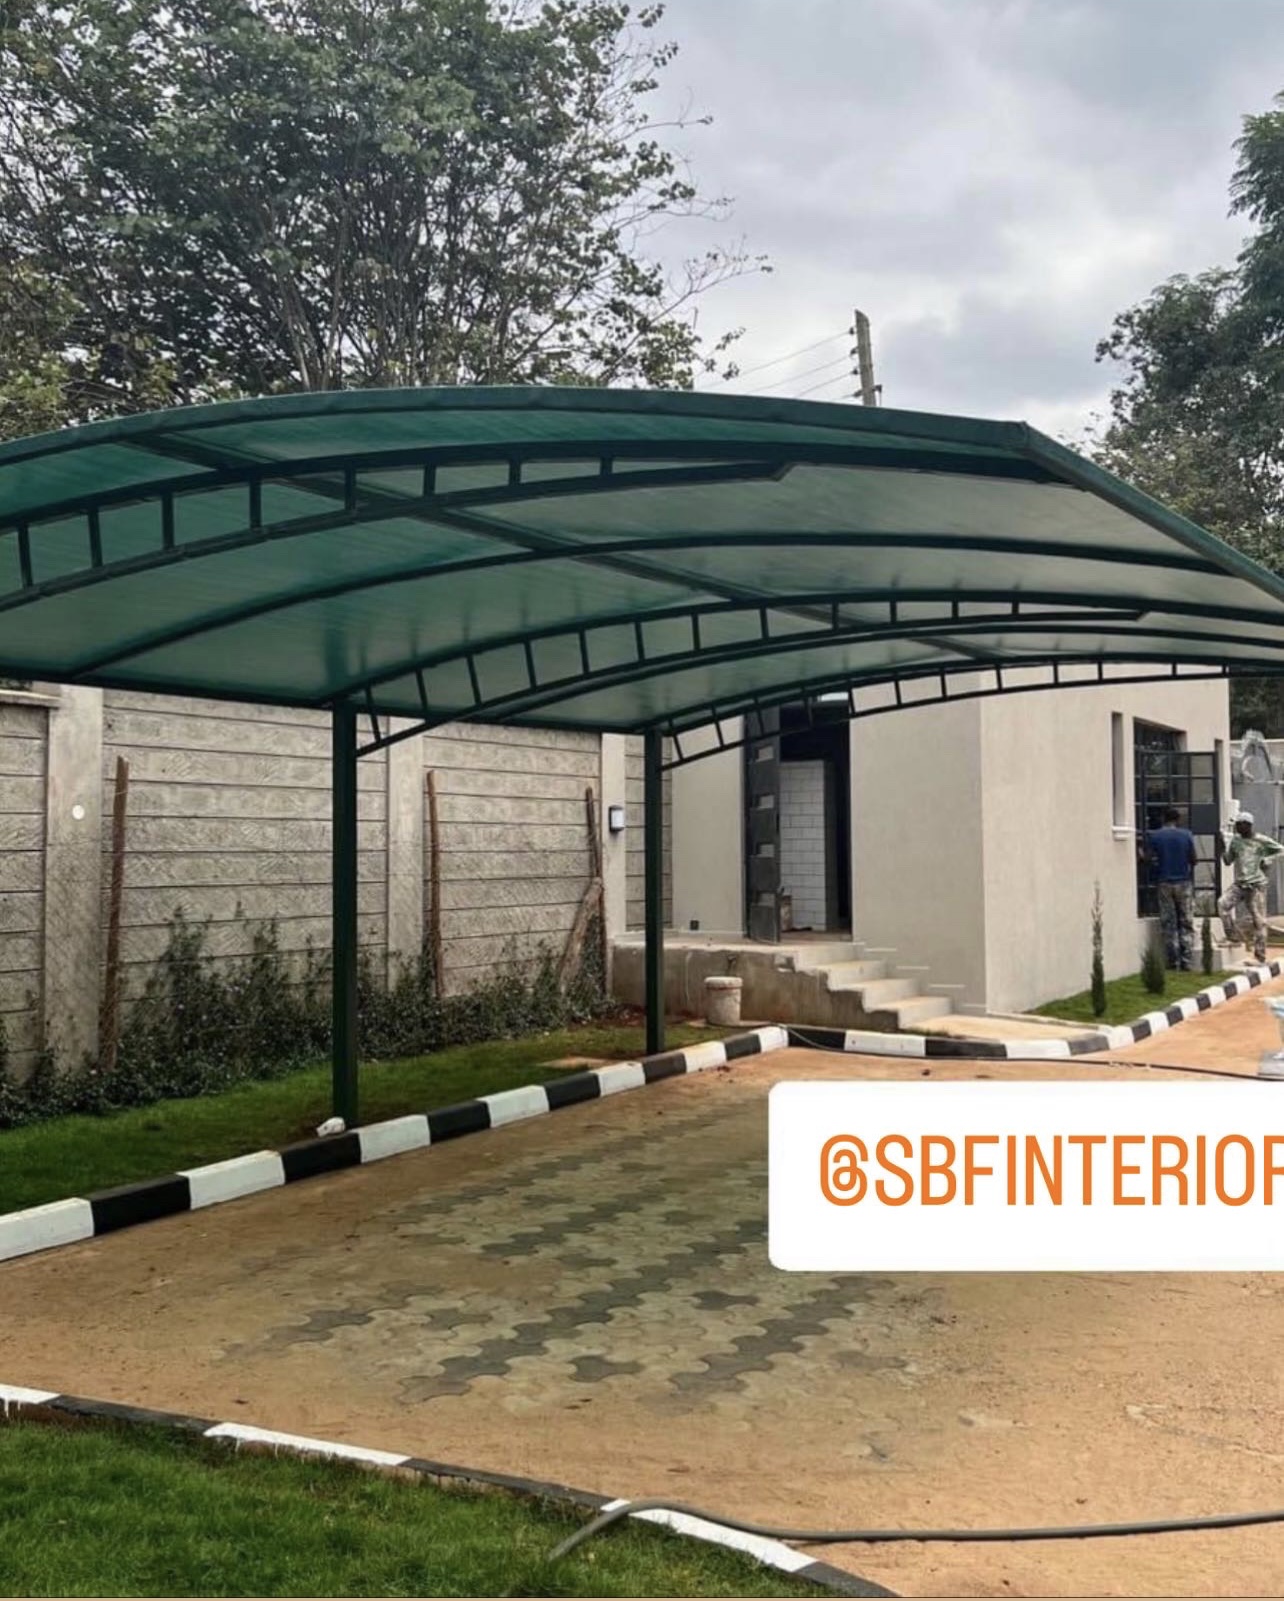 Unique and Modern Carports-Parking Shades-Vehicle Shade Canopies-Cantilever and Curved Shed designs-Waterproof Shade Net Car Covers-Commercial and Residential Car Shade Installers In Kenya Uganda Tanzania Rwanda Somalia South Sudan Burundi Ethiopia-